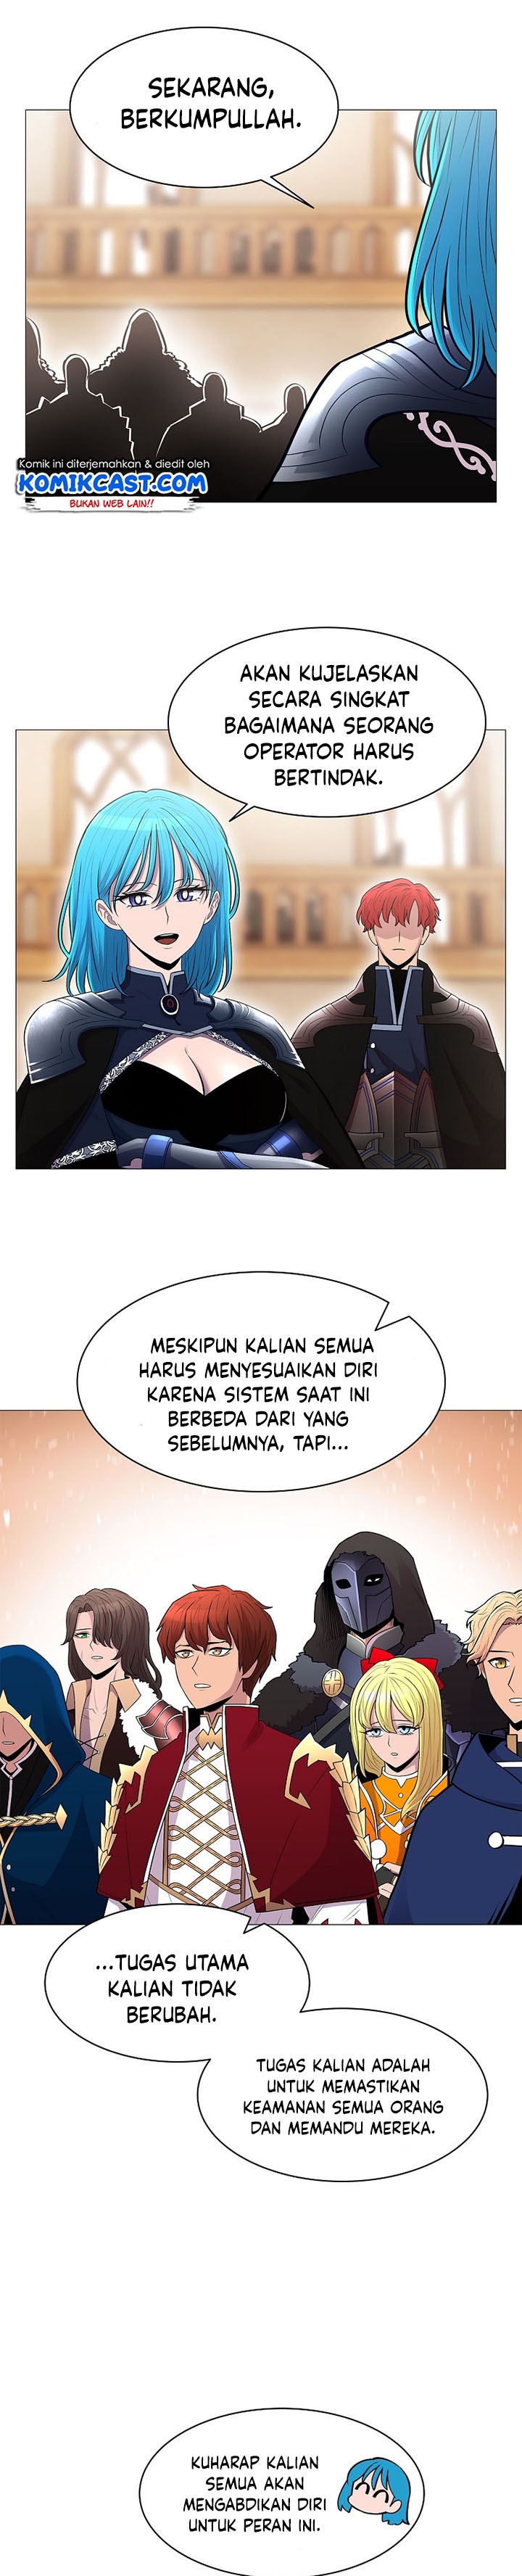 Updater Chapter 75 - 175